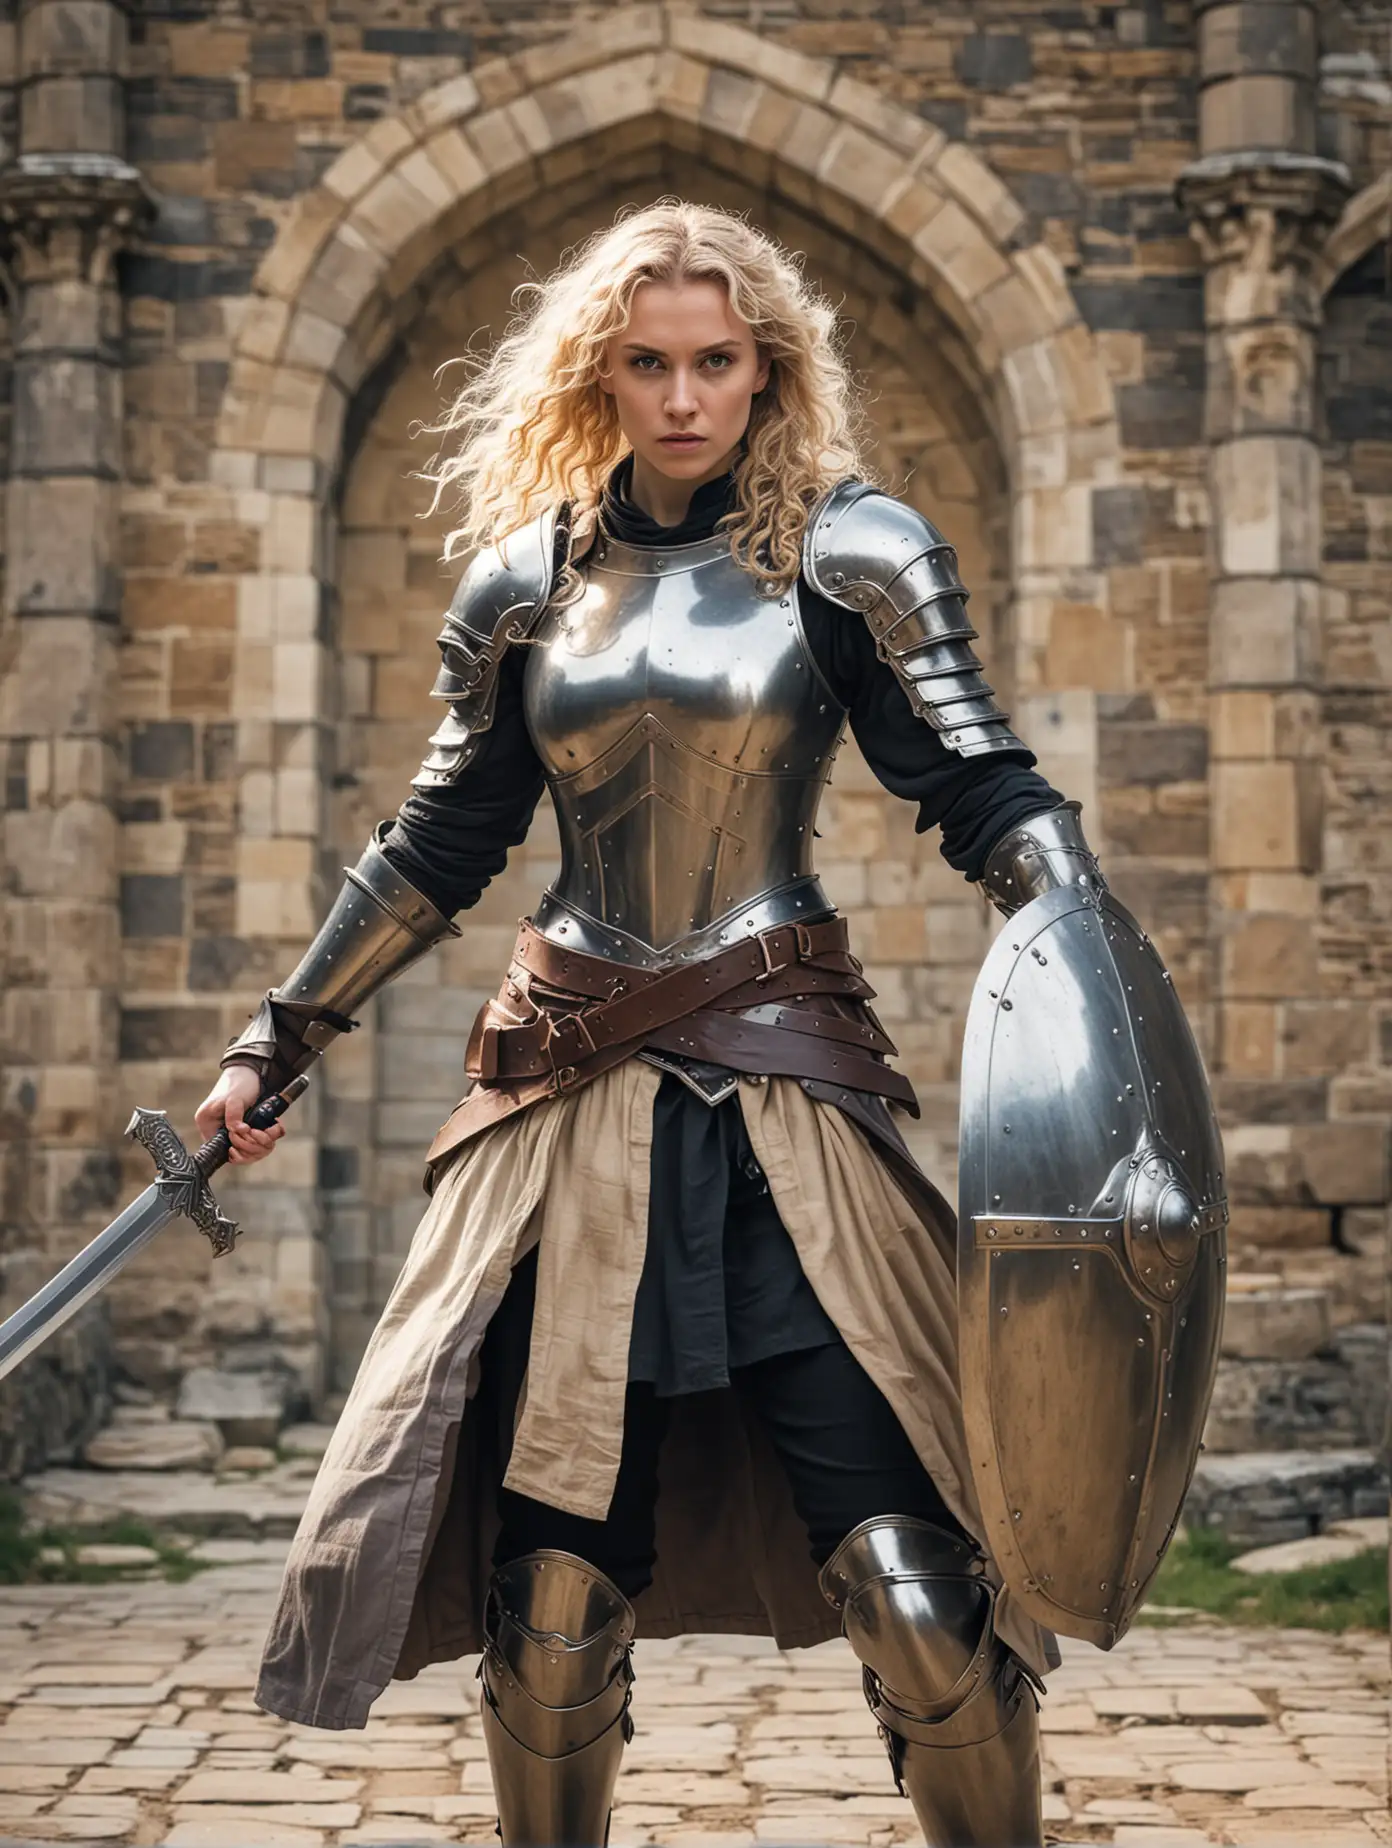 Angry Female Paladin with Blonde Ringlets in Fighting Stance at Castle